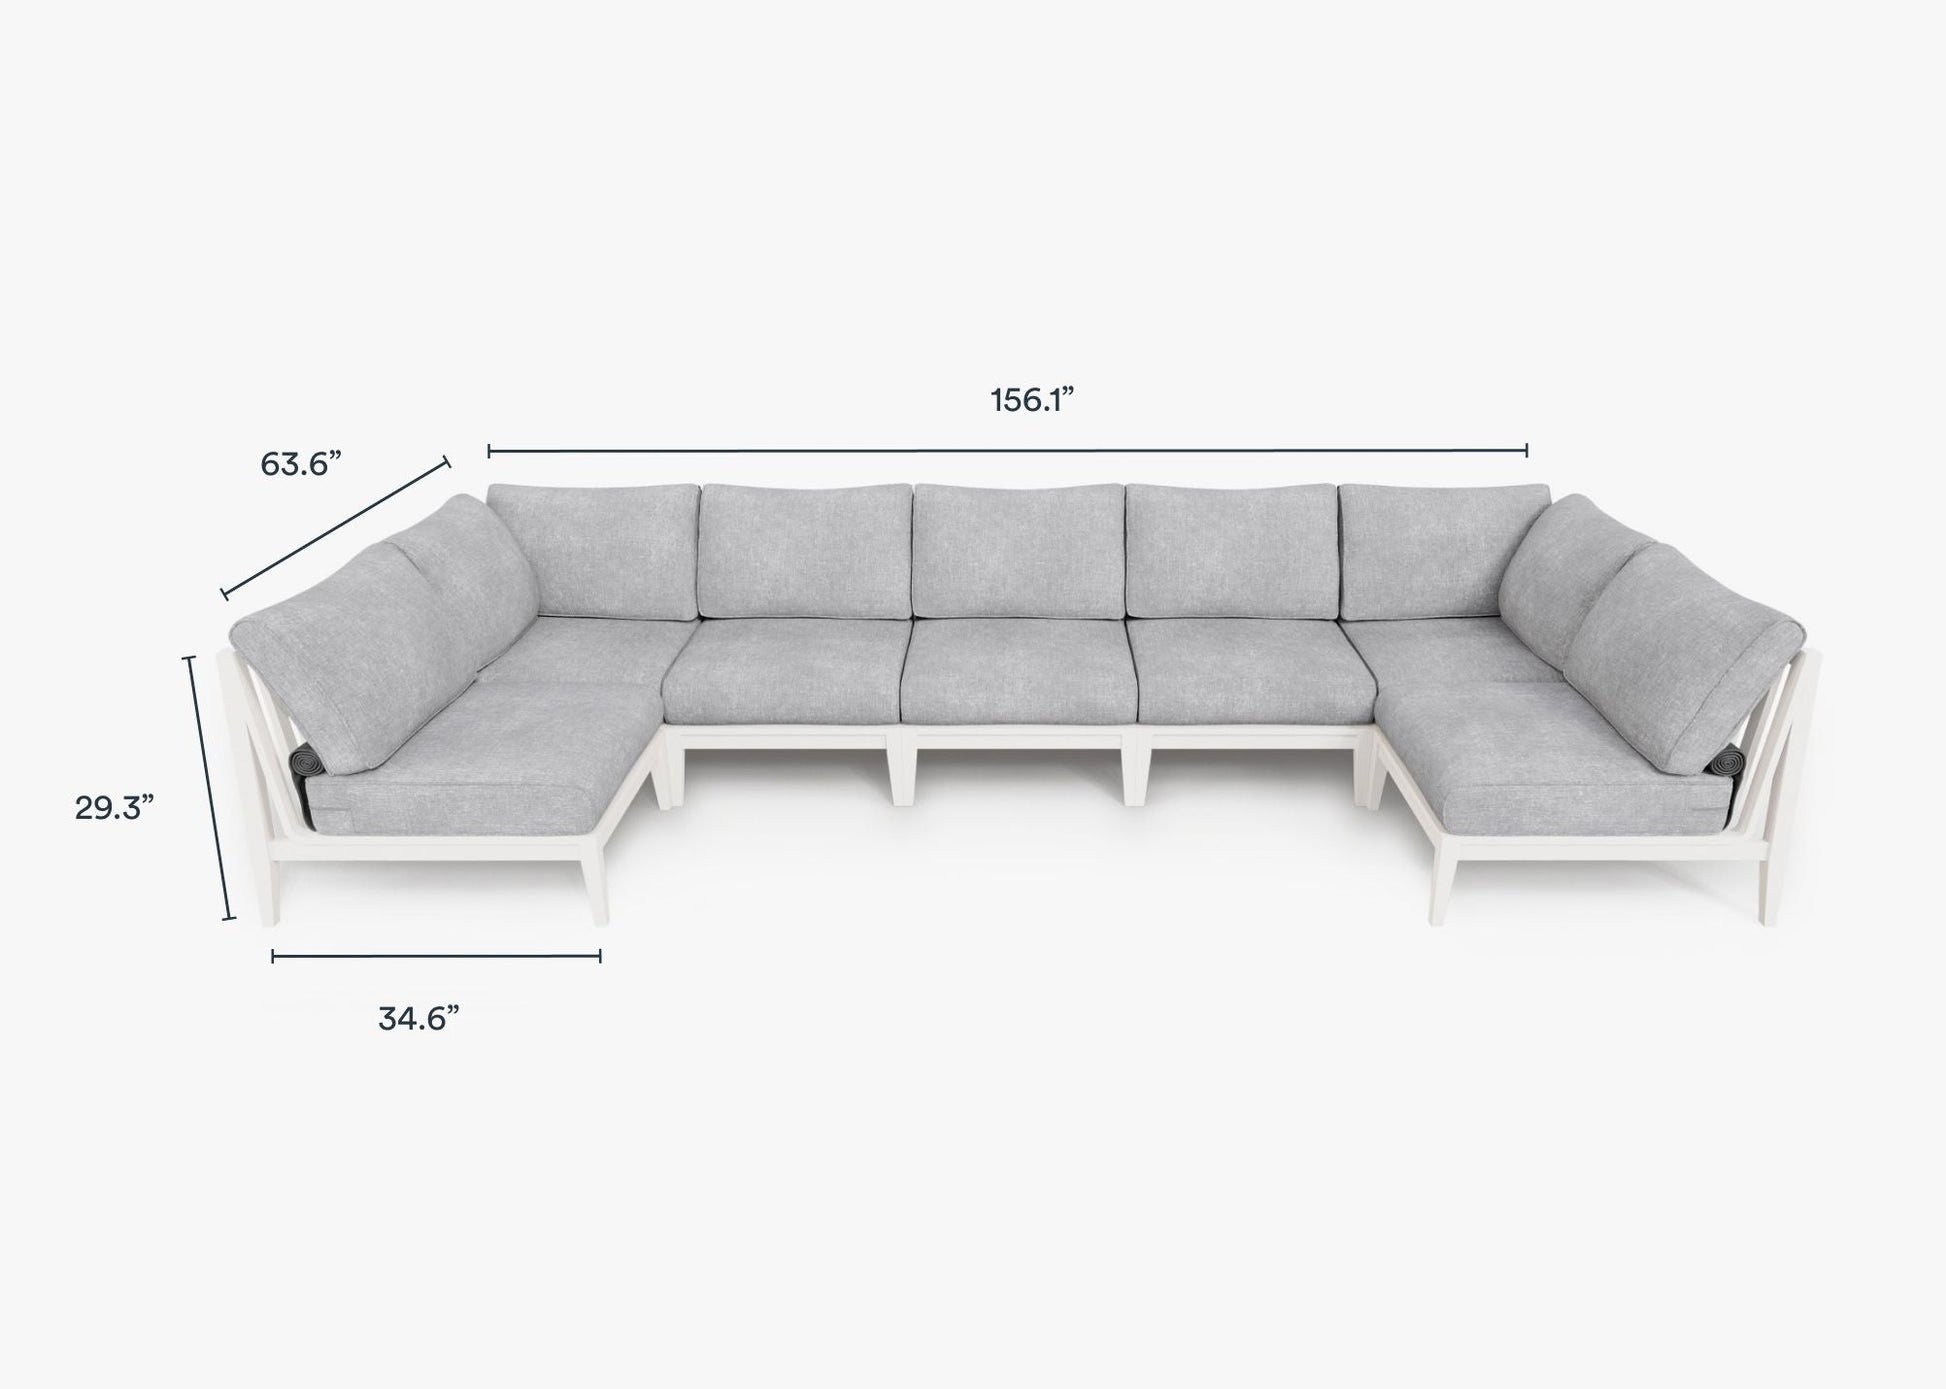 Live Outer 156" x 64" White Aluminum Outdoor U Sectional 7-Seat With Pacific Fog Gray Cushion